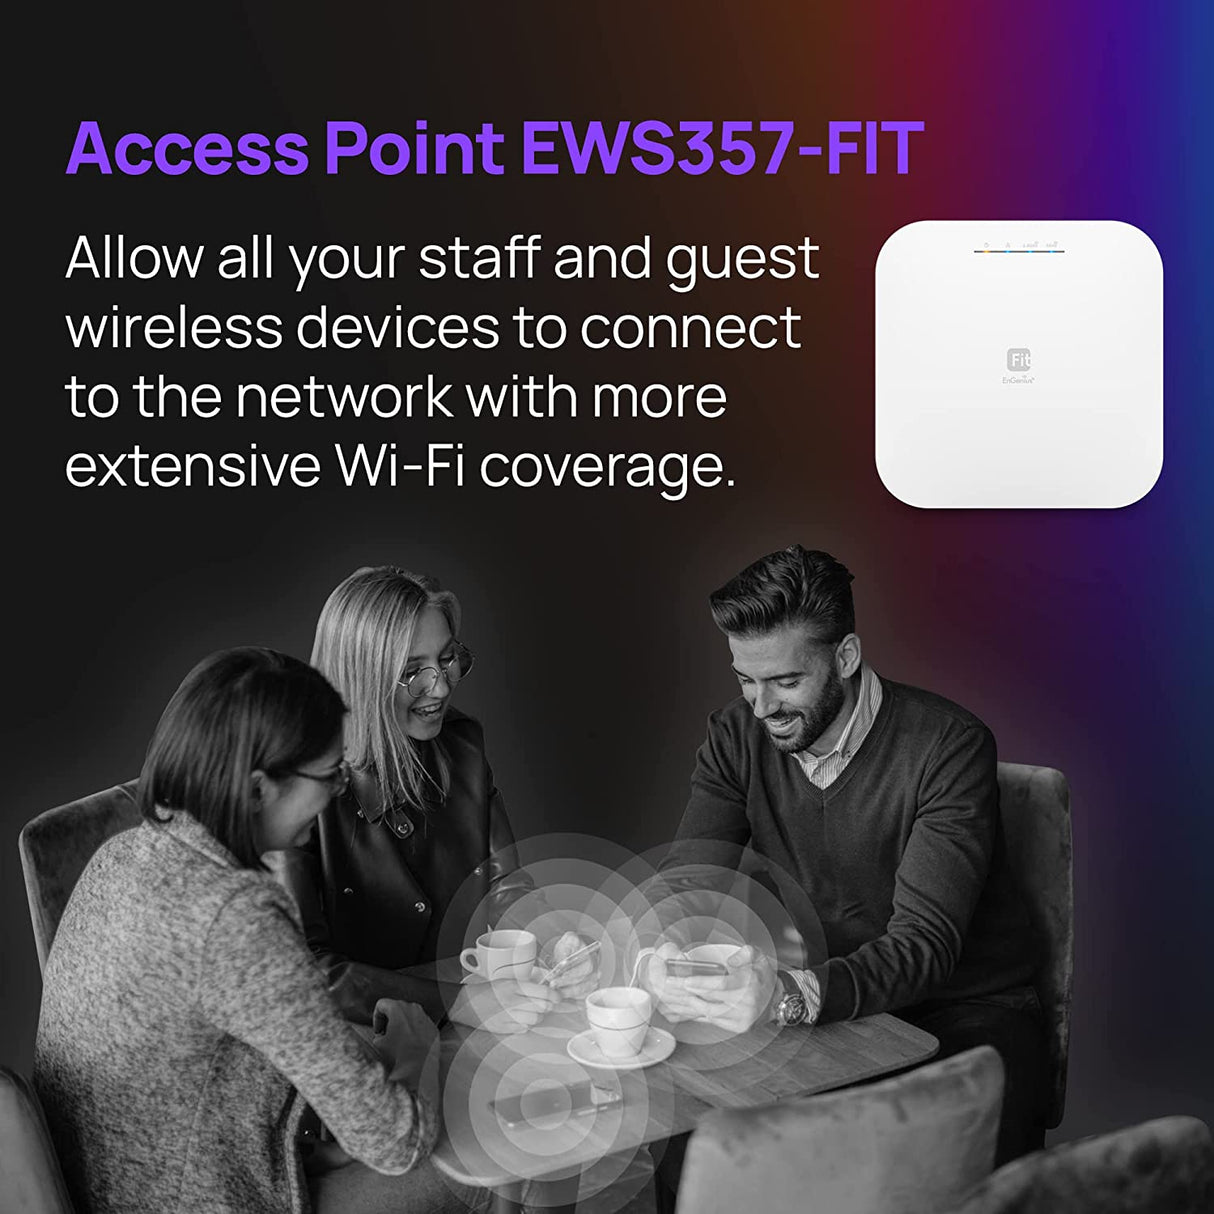 EnGenius EWS357-FIT WiFi 6 AX1800 2x2 Gigabit Wireless Access Point, 1Gbps Port, OFDMA, MU-MIMO, PoE+, WPA3, License-Free Cloud or On-Premise Flexible Management Tools (Power Adapter Not Included) AX1800 - FIT